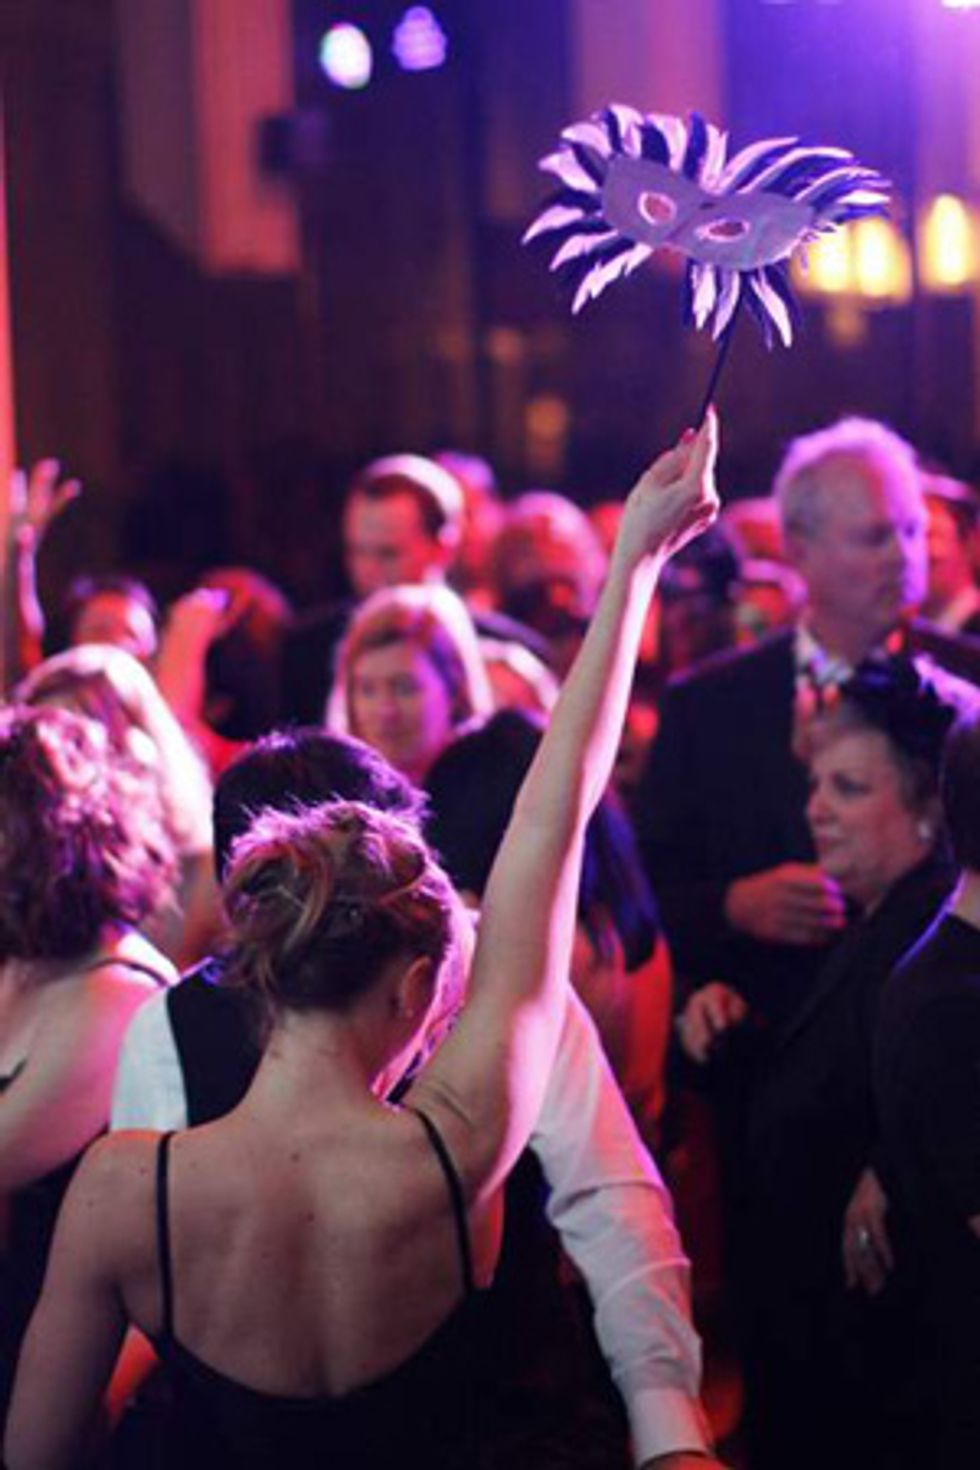 Suit Up for the SF Symphony's NYE Masquerade Ball